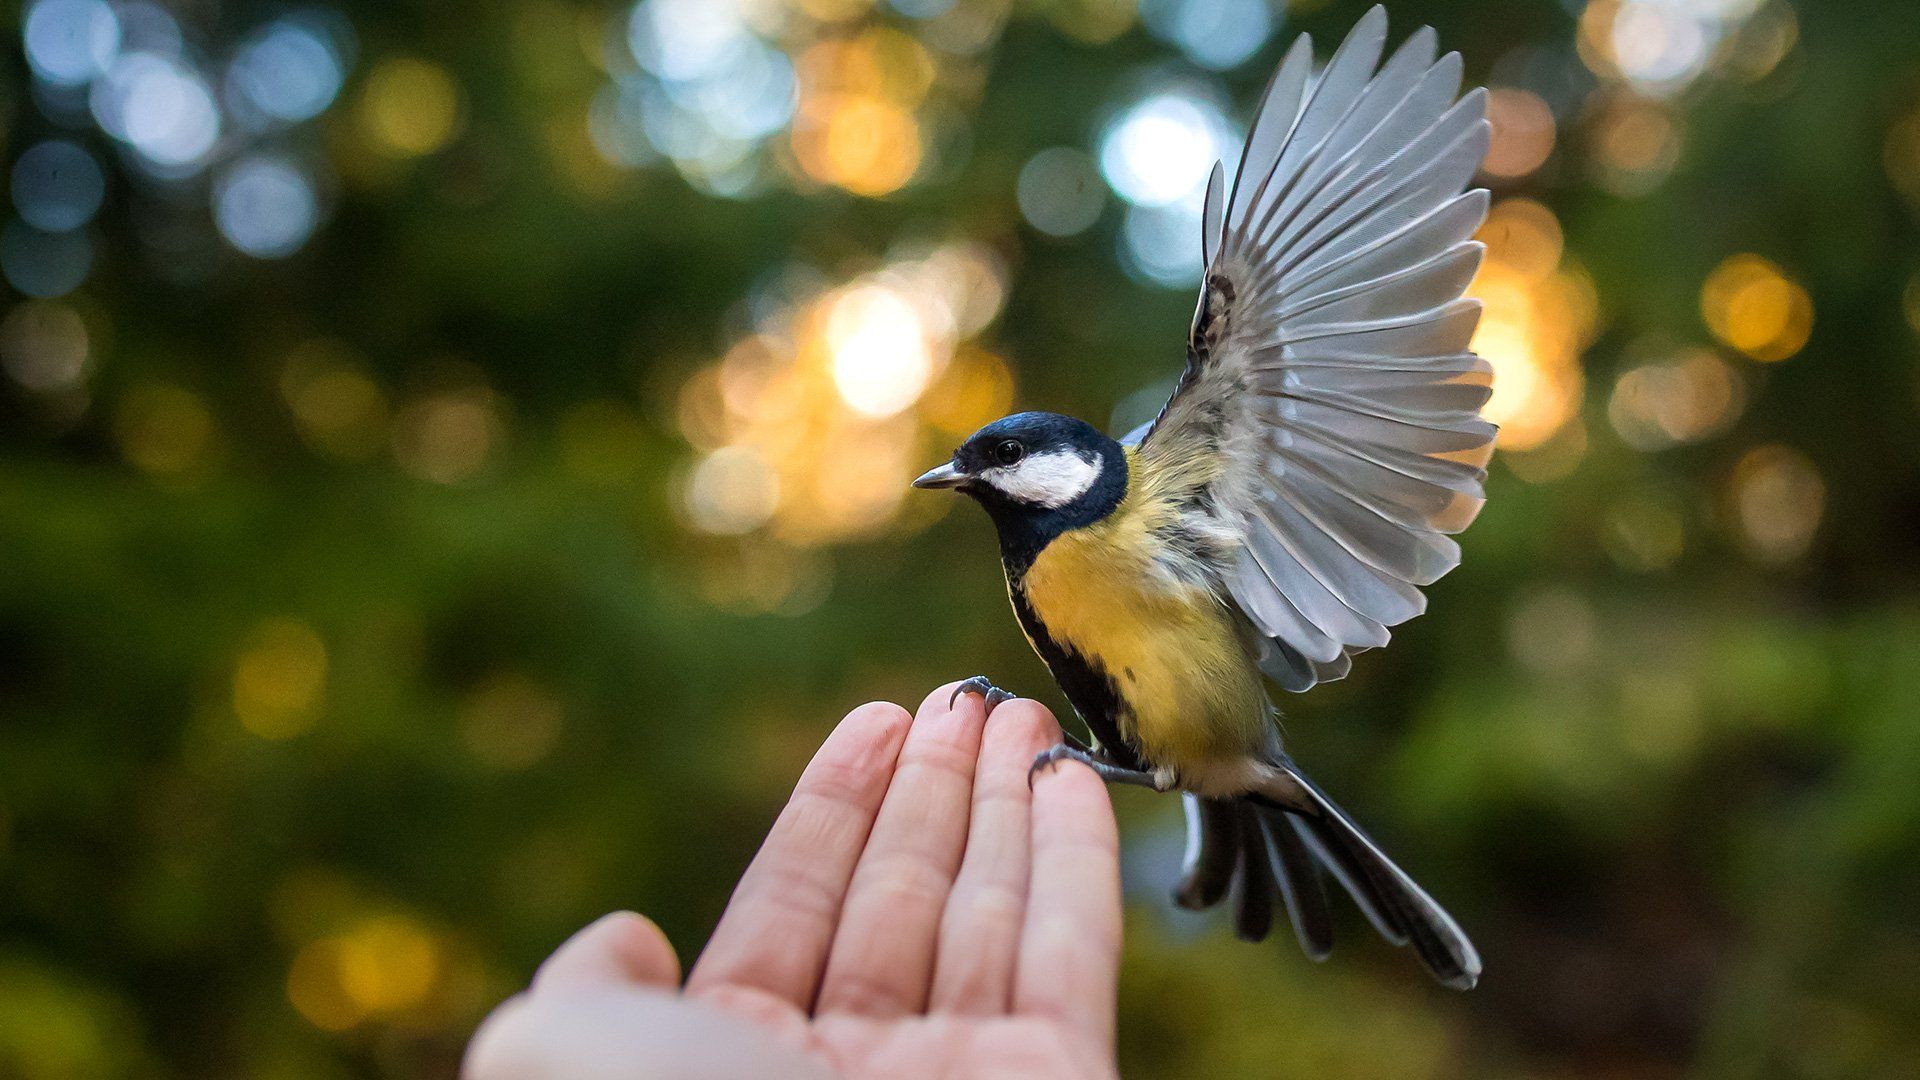 A small yellow bird perches on a hand in front of us, its wings outstretched.